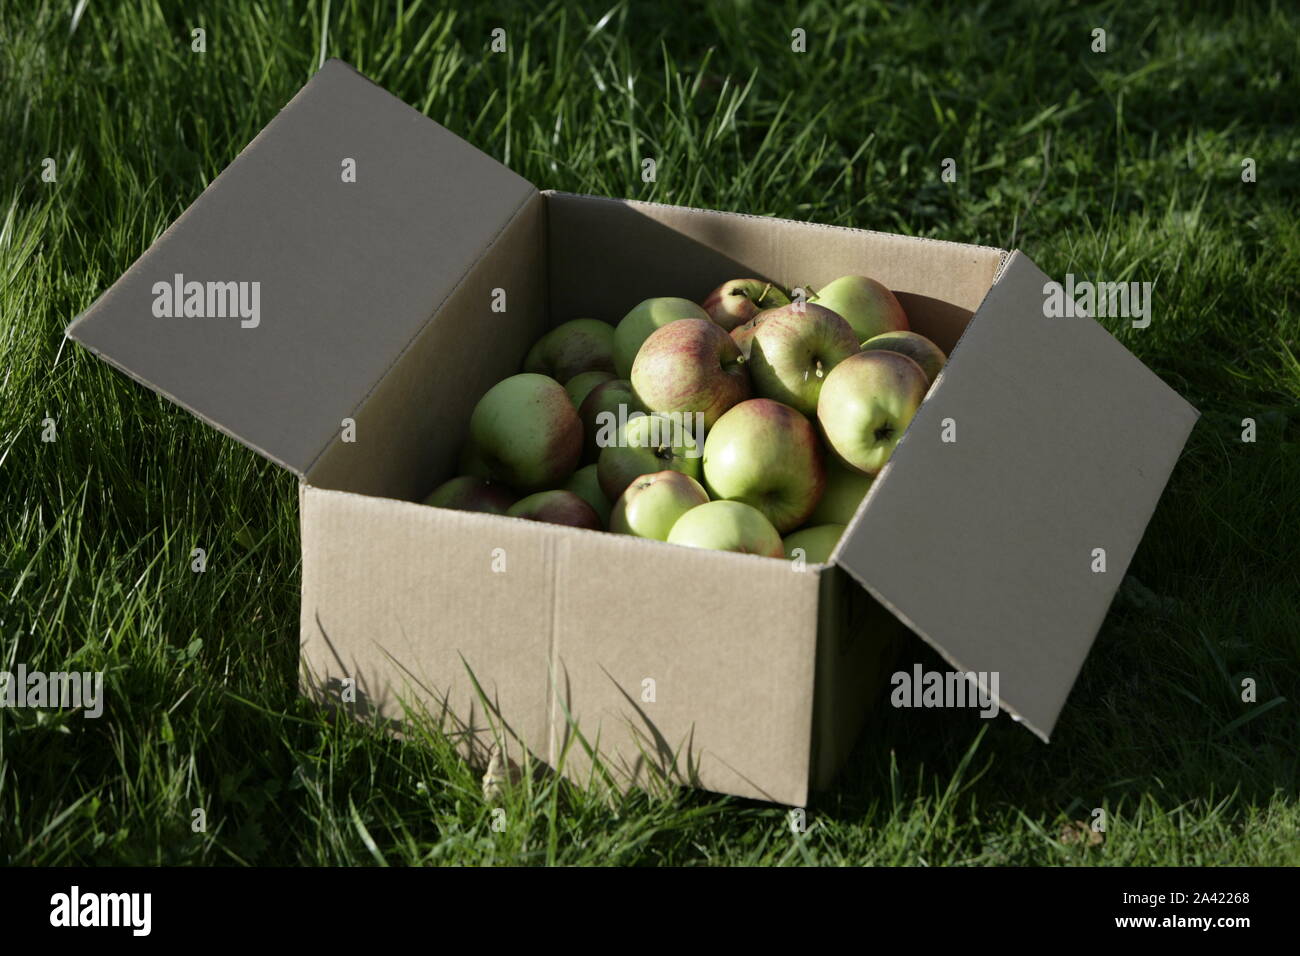 Box Containing Fresh Harvested Ripe Apples Stock Photo